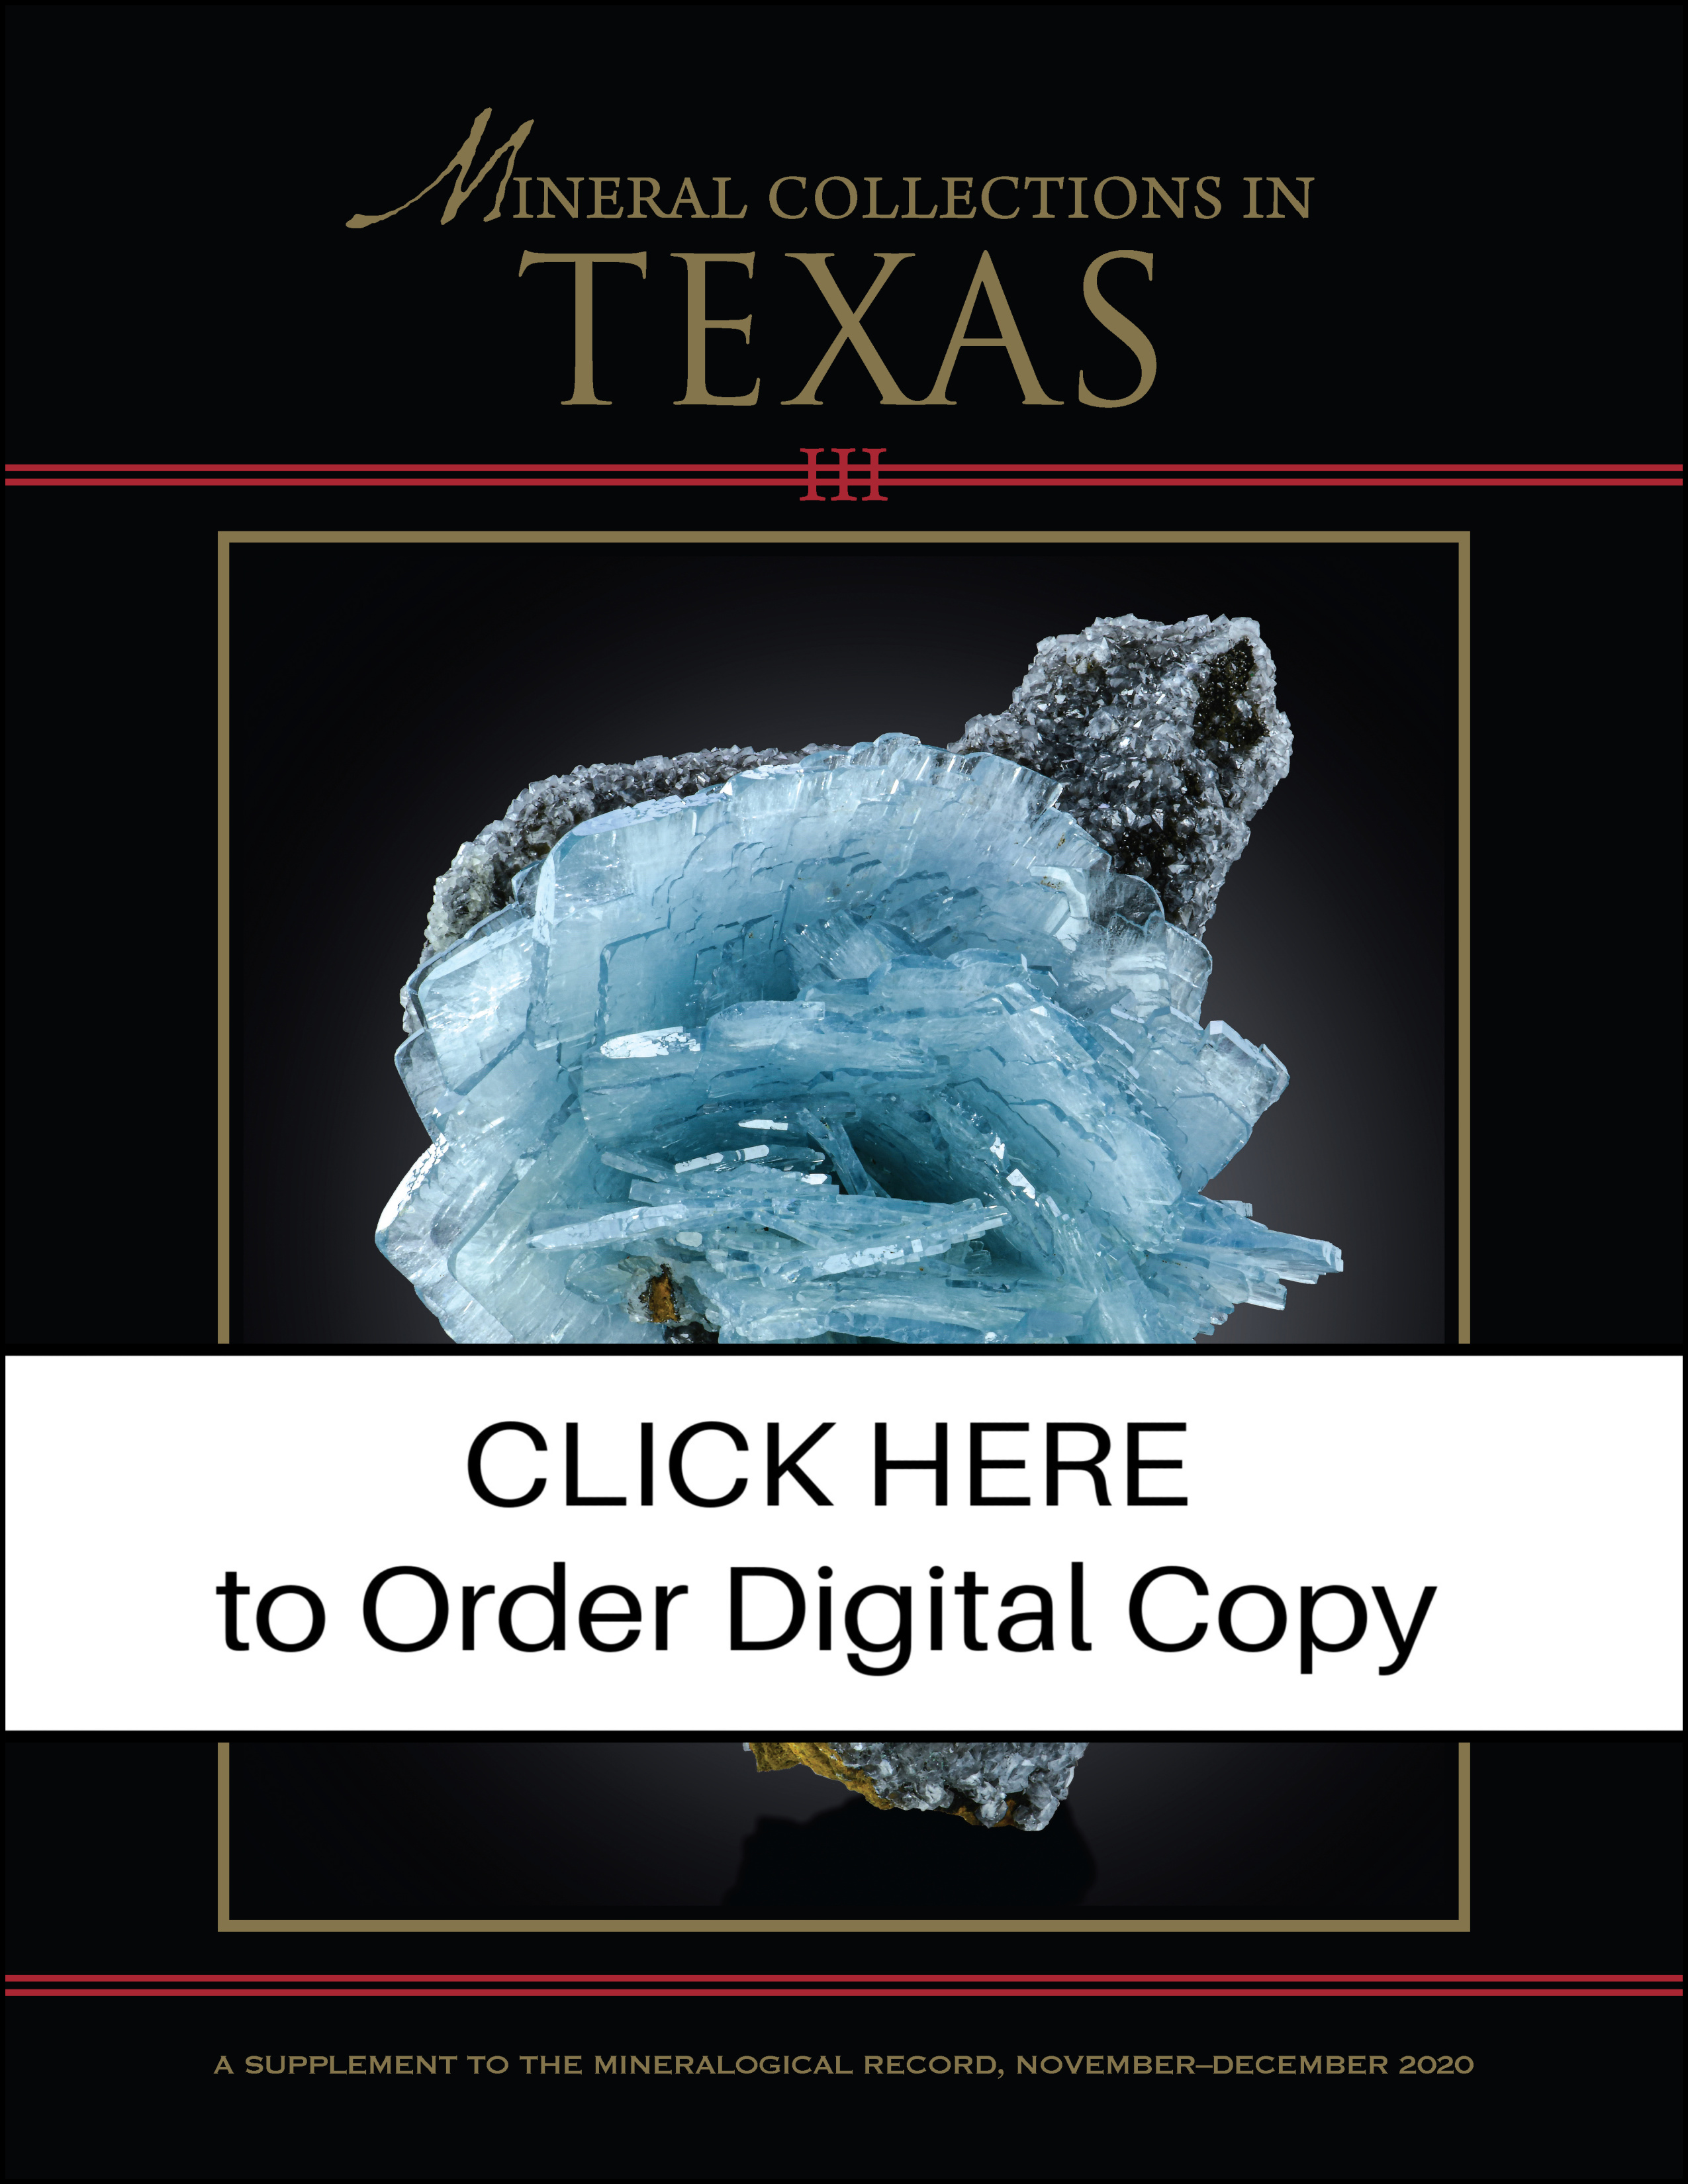 Mineral Collections in Texas III, v51 n6.1 (Available only in Digital)